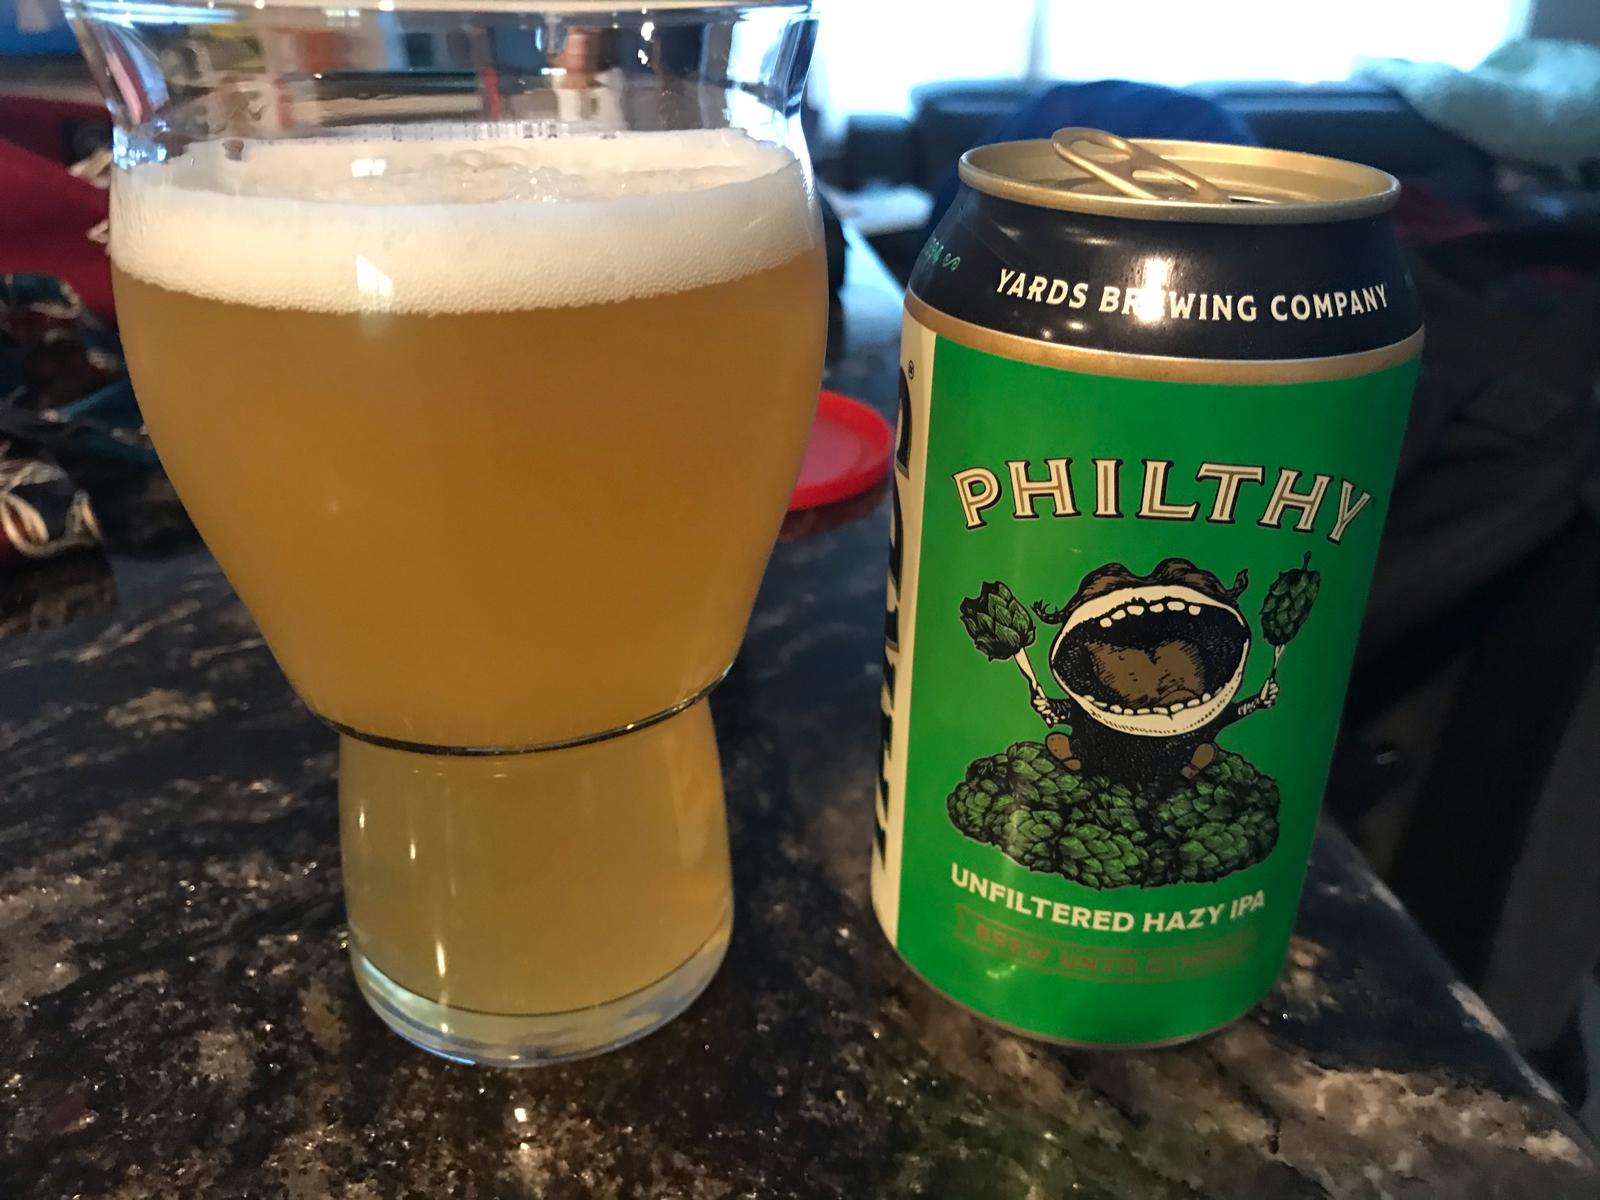 Philthy Unfiltered Hazy IPA